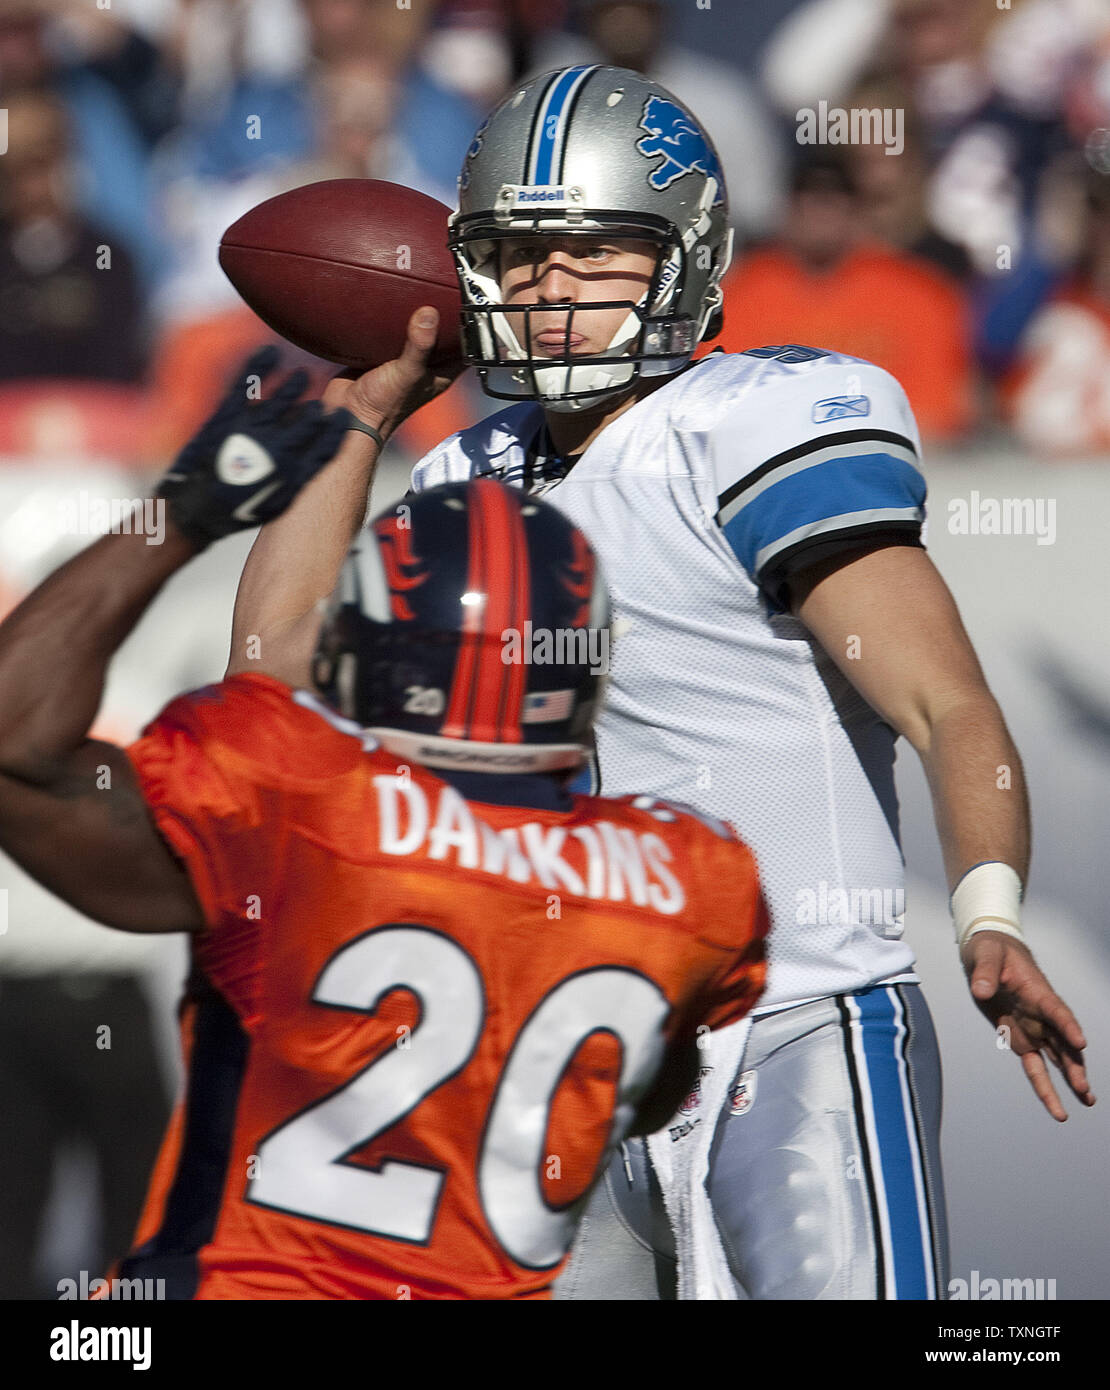 Detroit Lions quarterback Matthew Stafford throws over Denver Broncos safety Brian Dawkins at Sports Authority Field at Mile High in Denver on October 30, 2011.     UPI/Gary C. Caskey Stock Photo